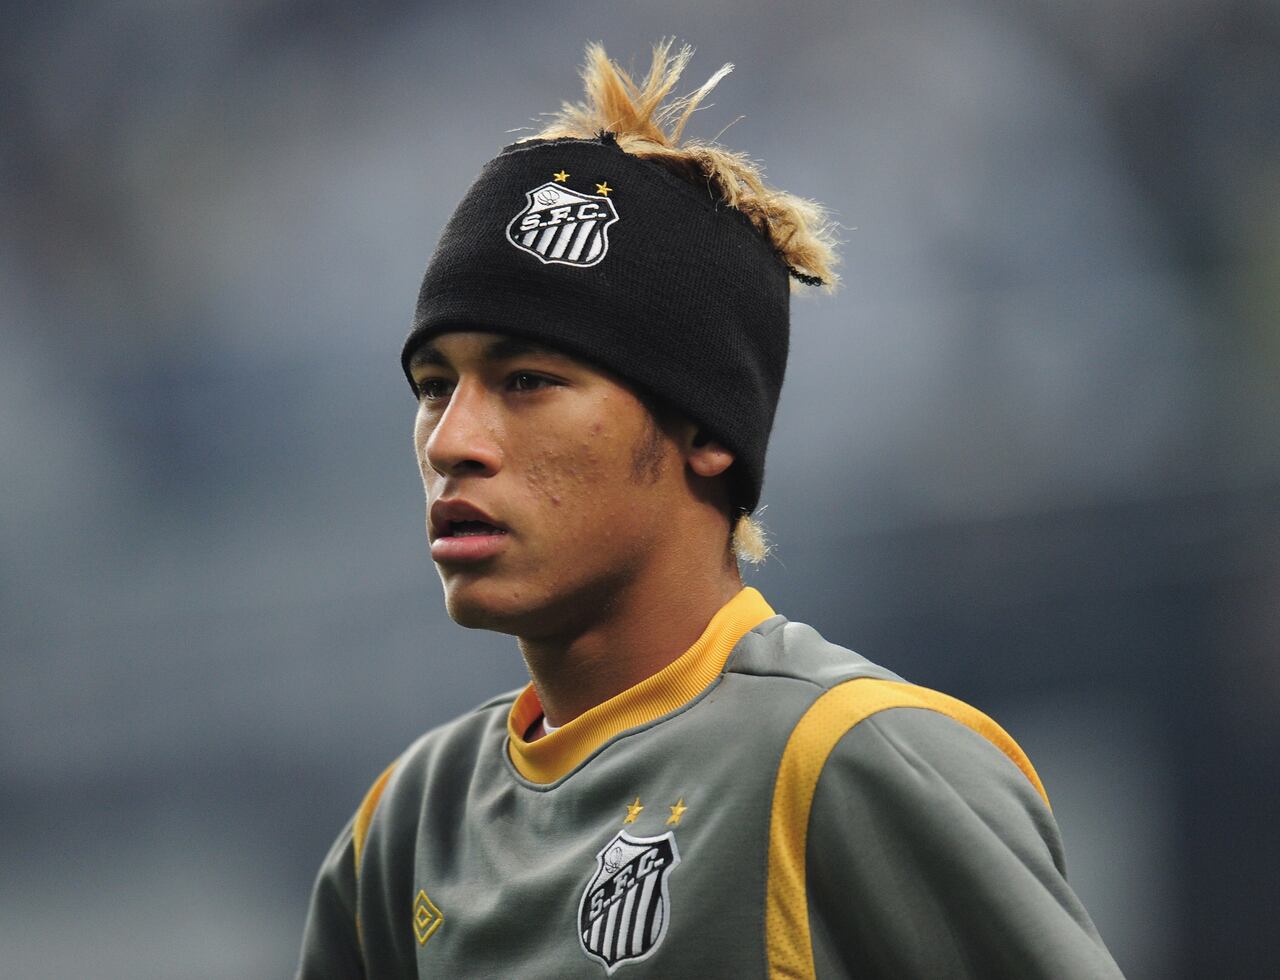 TOYOTA, JAPAN - DECEMBER 14:  Neymar of Santos warms up before the FIFA Club World Cup semi final match between Kashiwa Reysol and Santos at Toyota Stadium on December 14, 2011 in Toyota, Japan.  (Photo by Shaun Botterill - FIFA/FIFA via Getty Images)